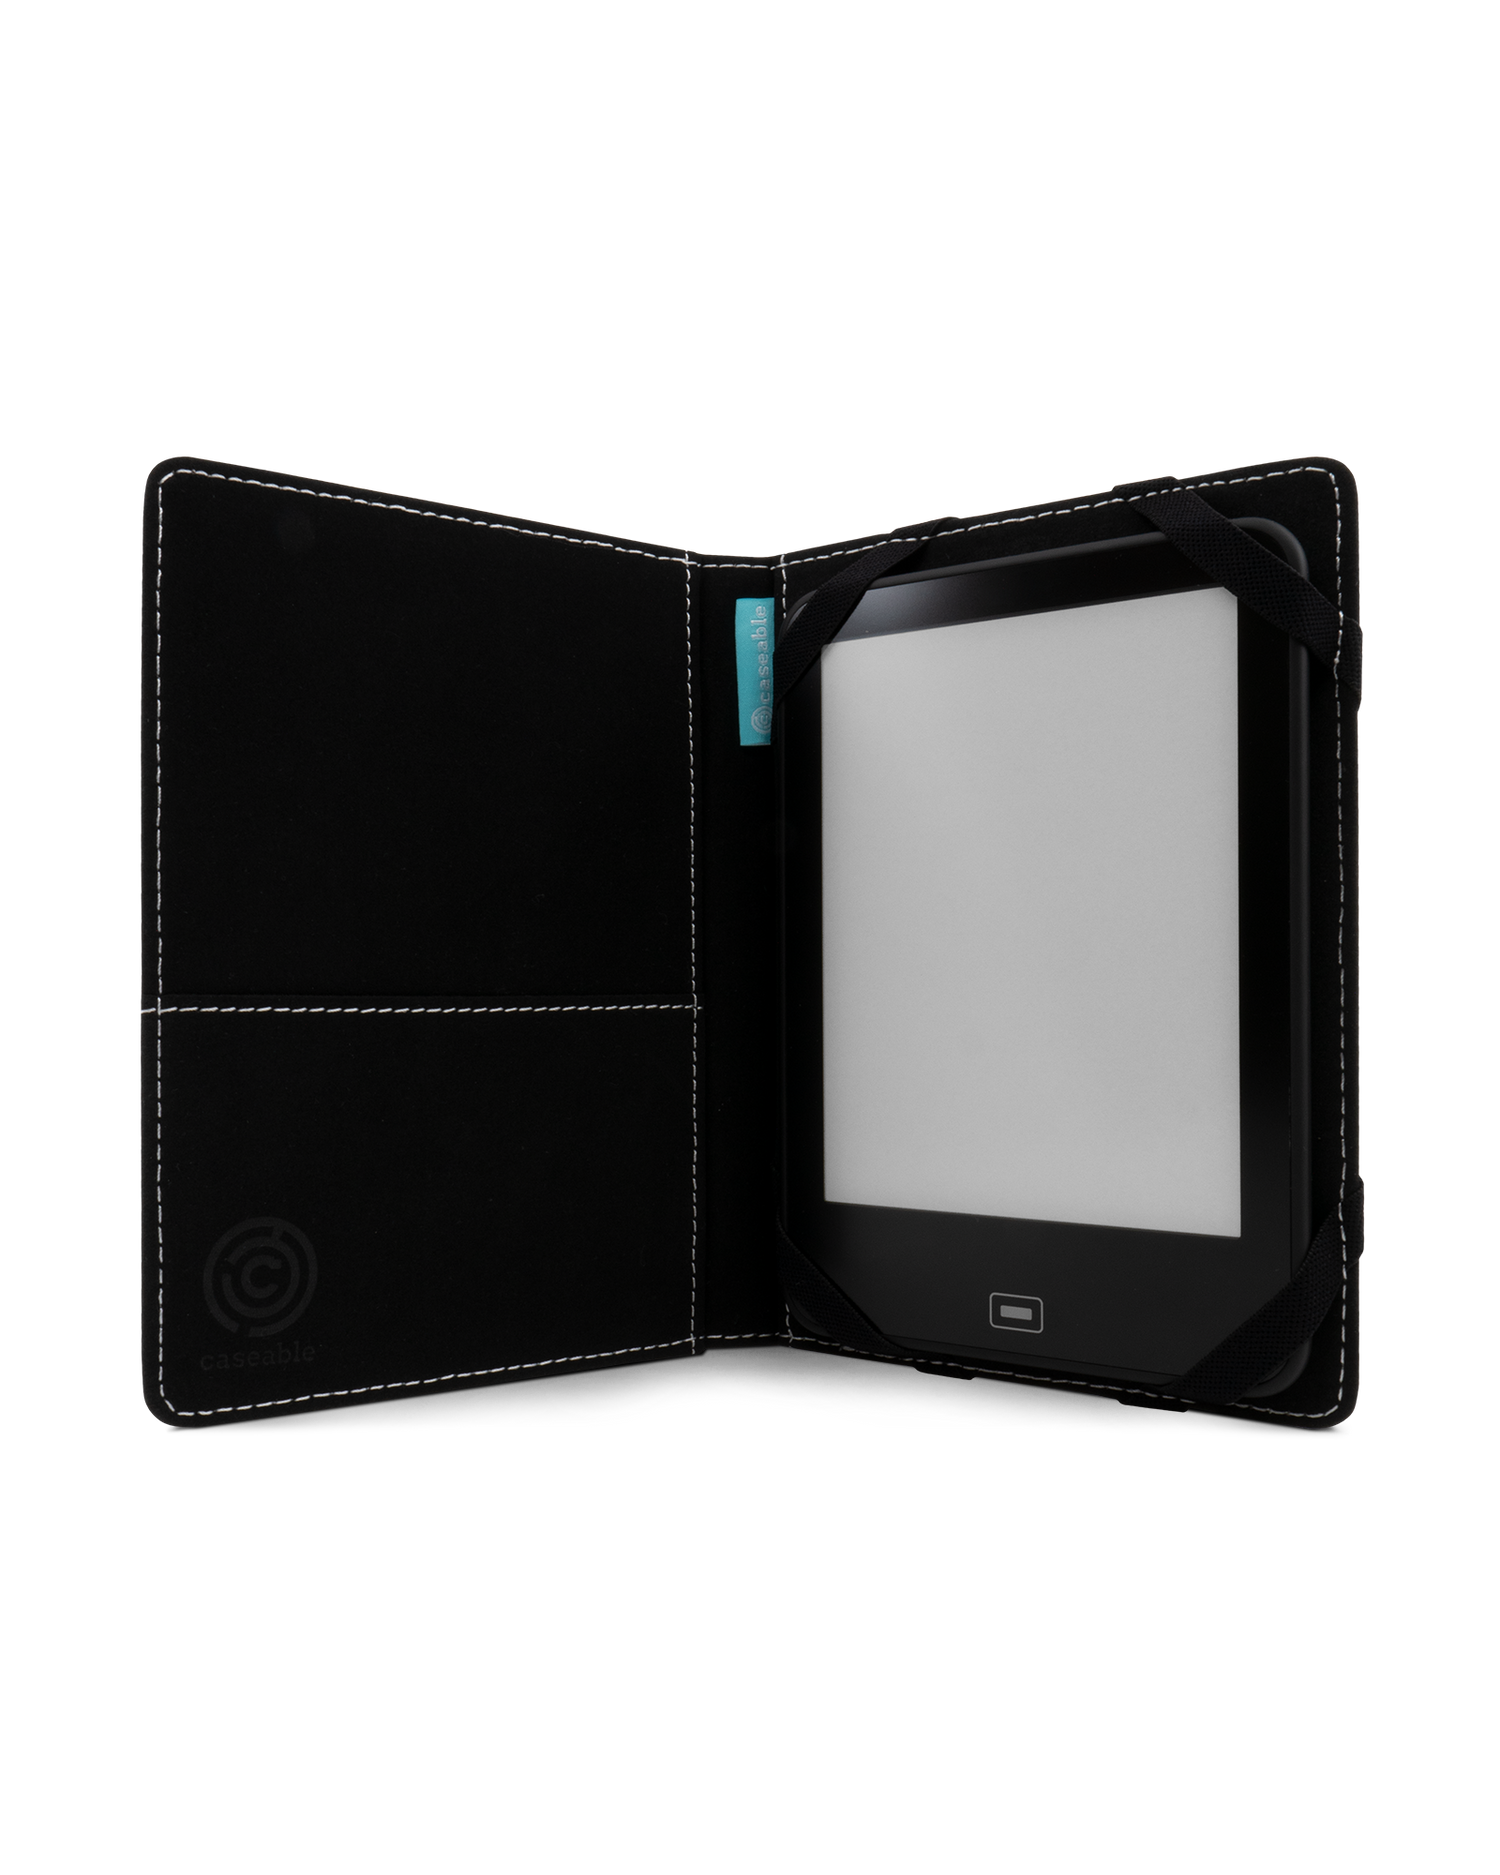 Cow Print eReader Case S: Opened interior view